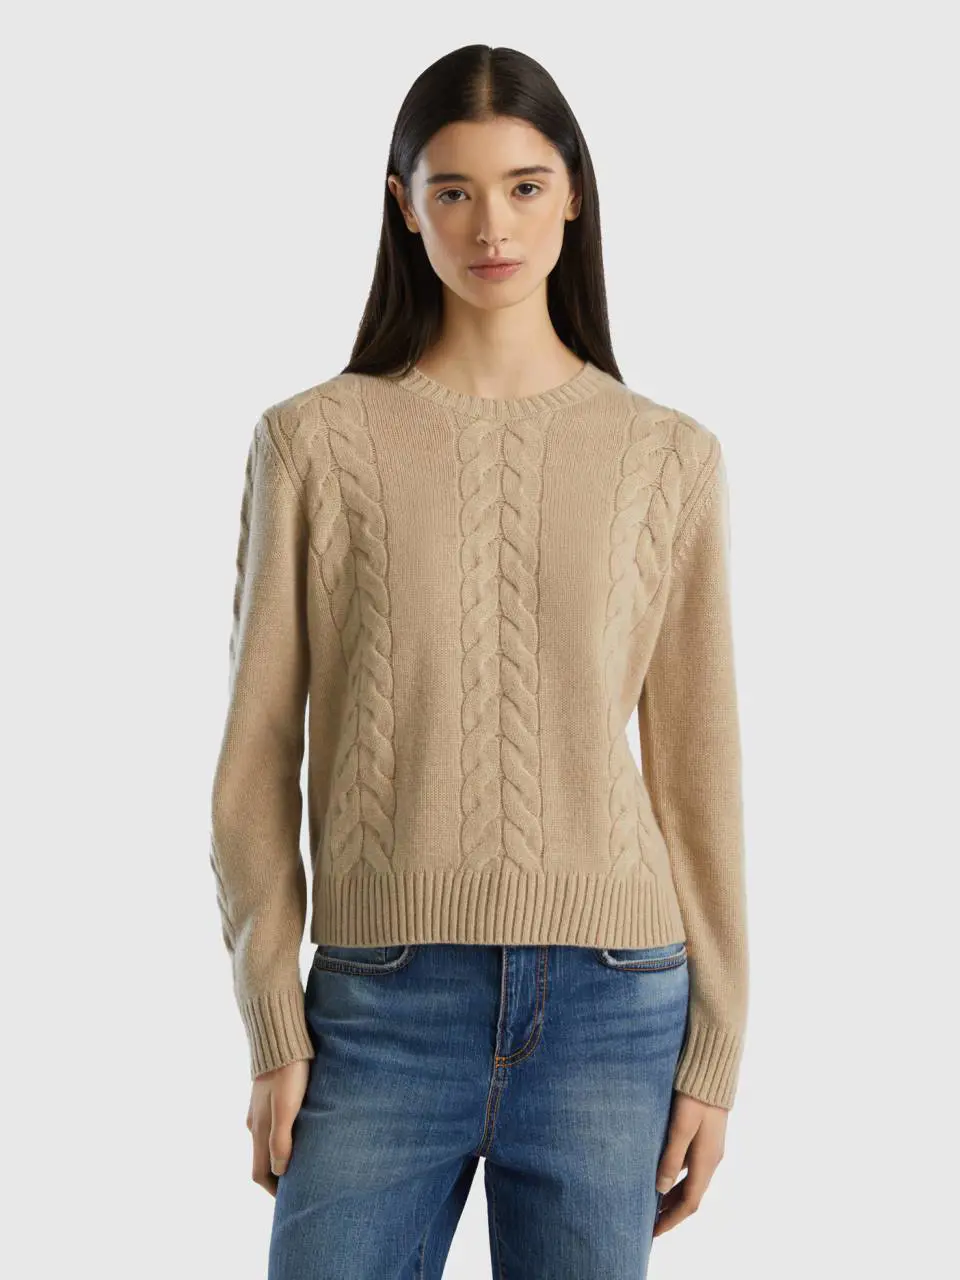 Benetton cable knit sweater in pure cashmere. 1